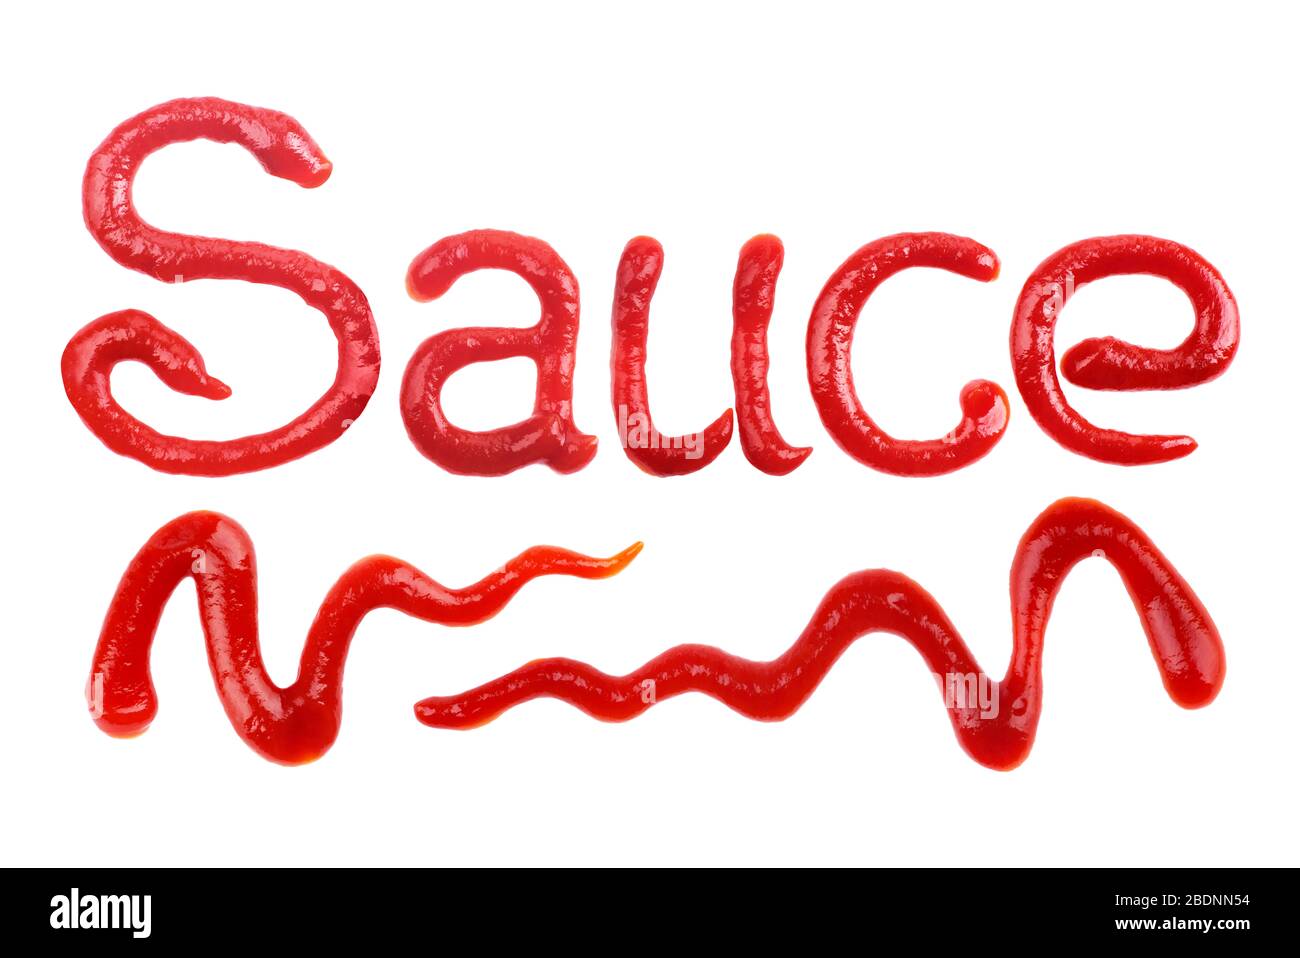 The word 'Sauce' written with ketchup on white Stock Photo